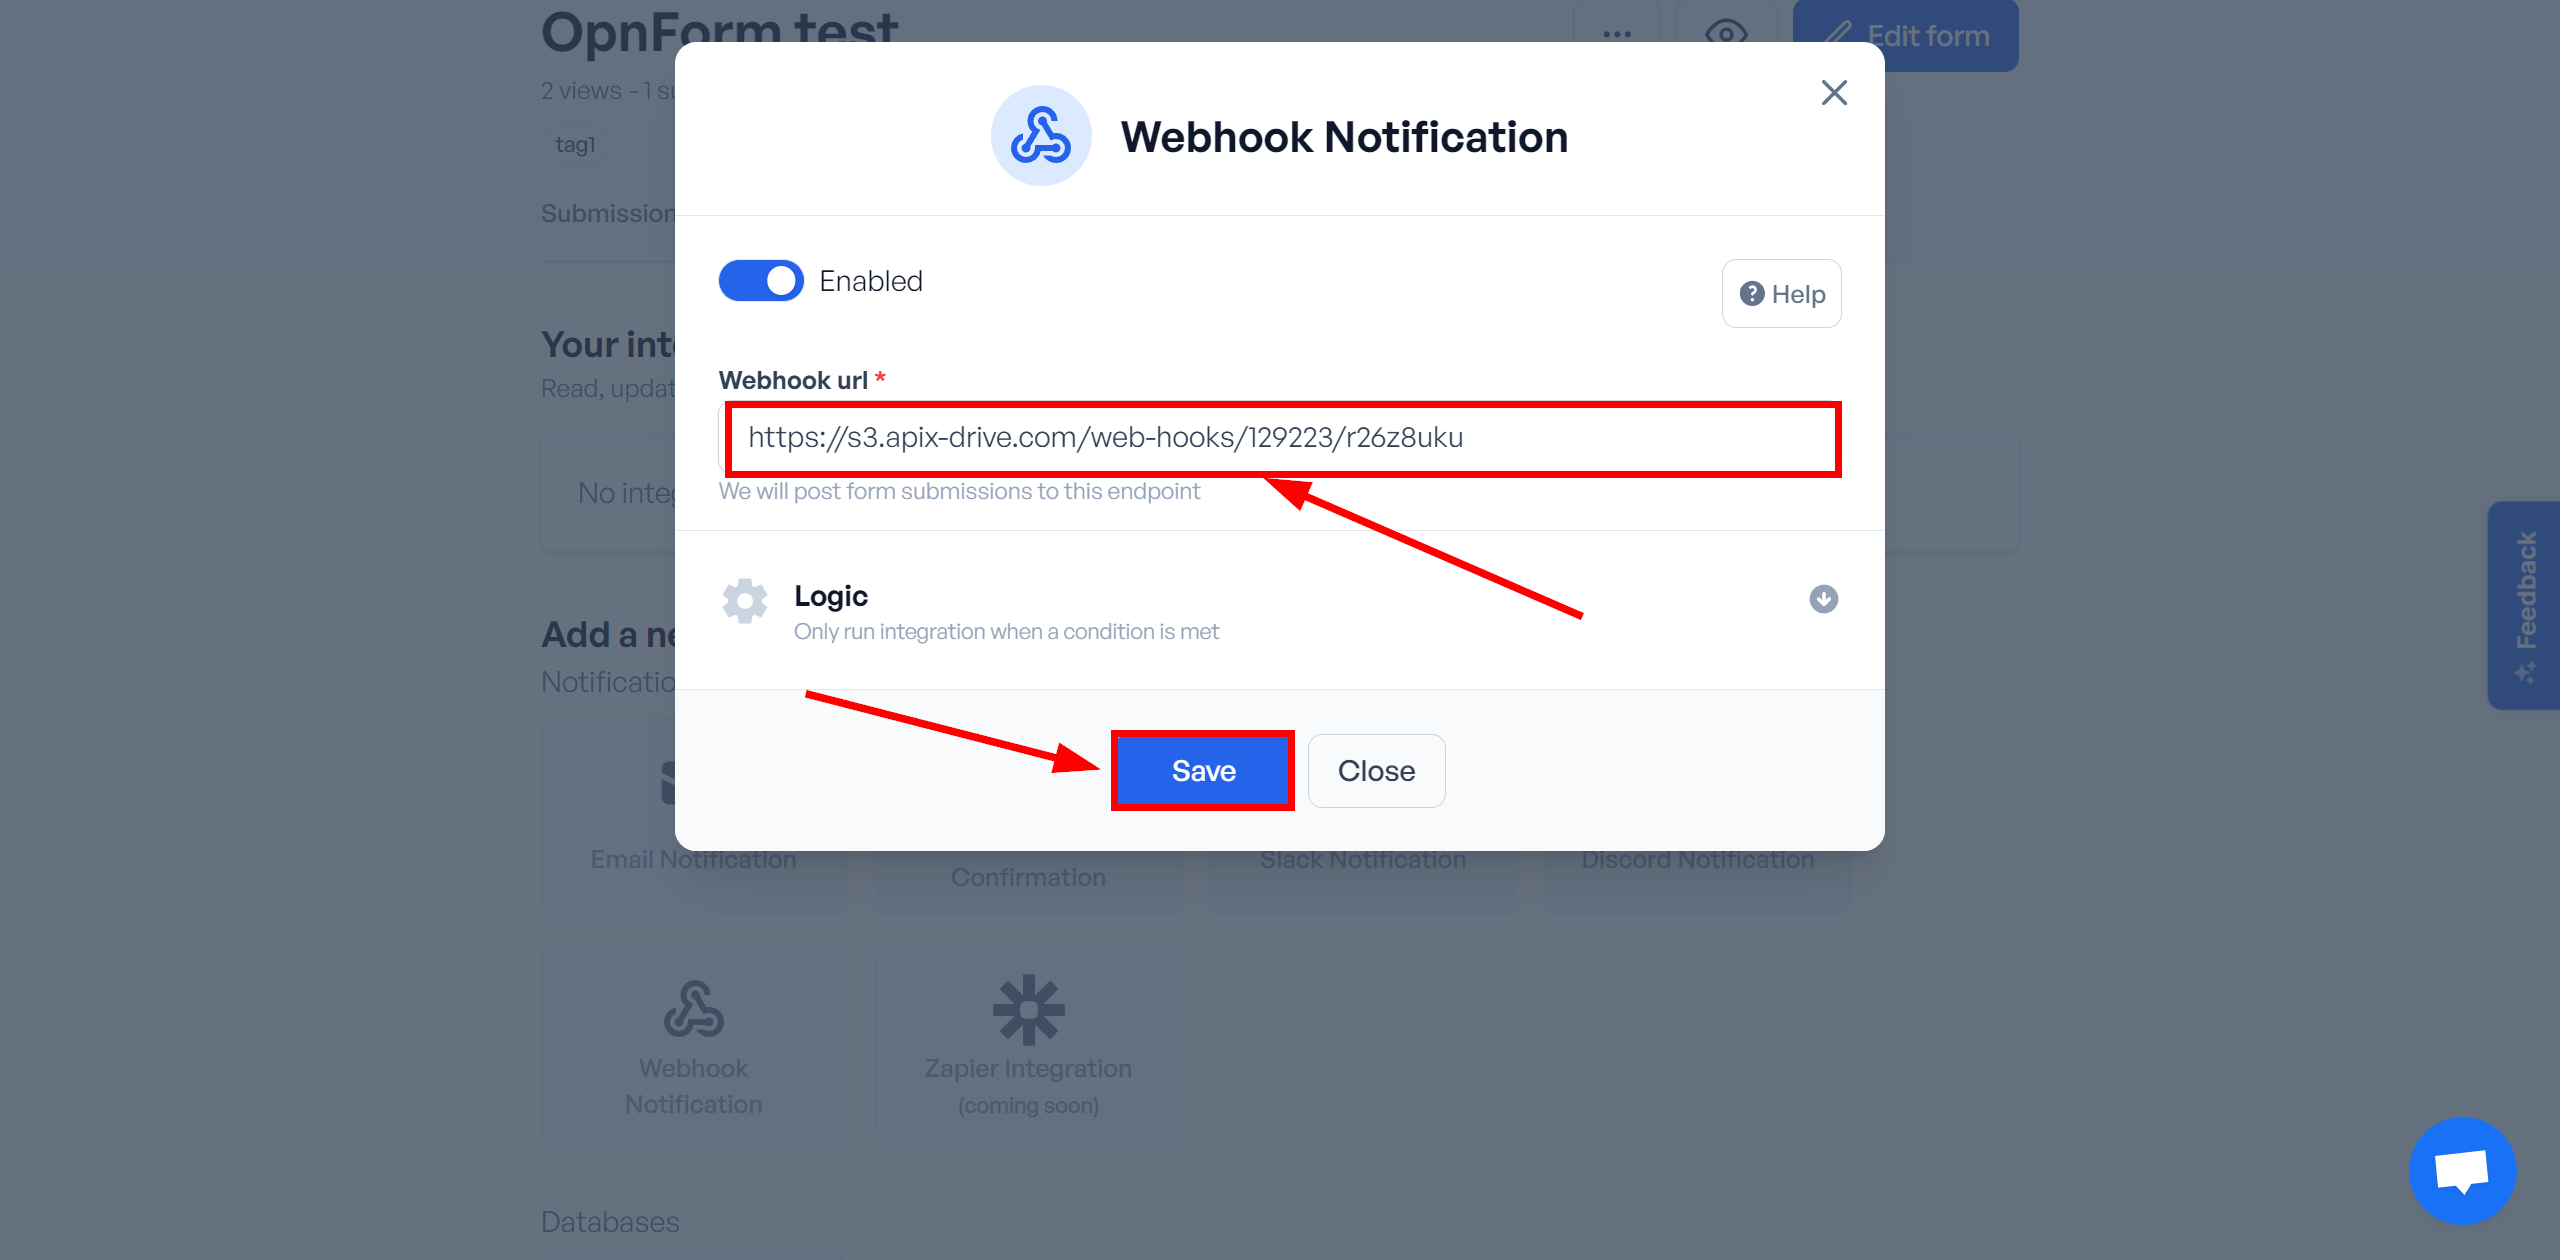 How to Connect OpnForm as Data Source | Webhook Setup